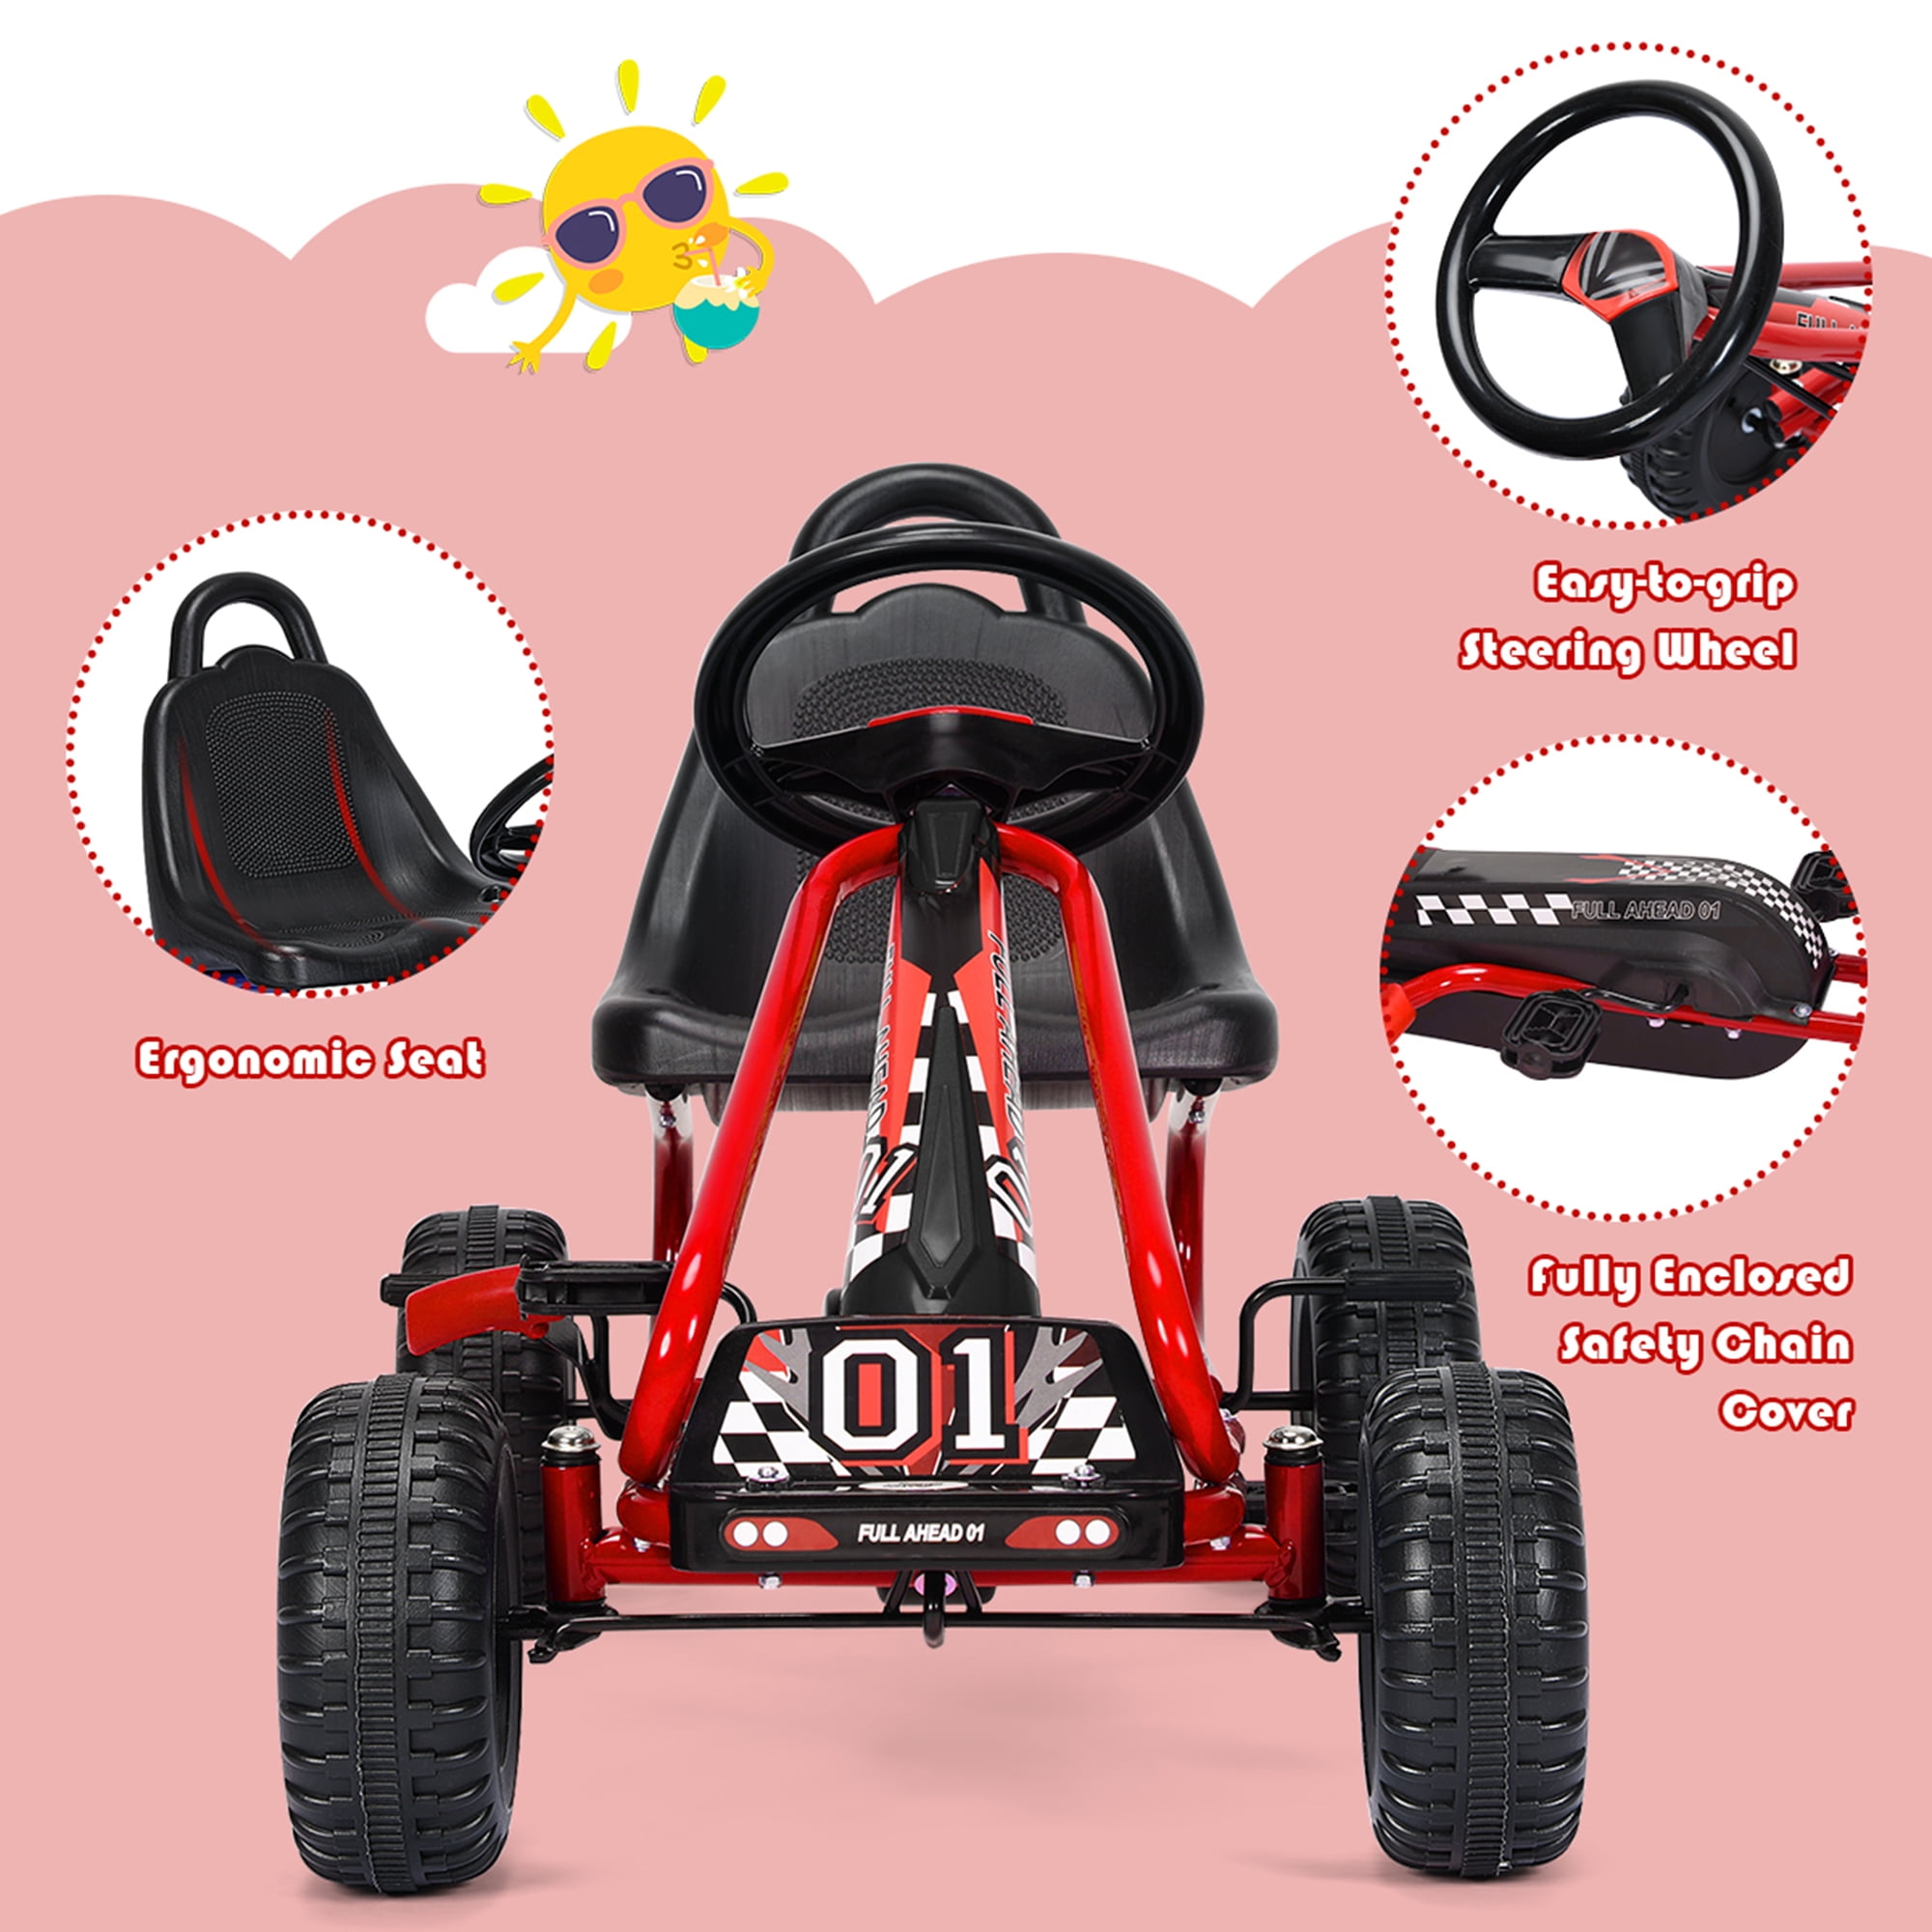 4 Wheel Pedal Go Kart Kid’s Ride-on with Optional Installation Position Manual Brake Lever Music and Horn Red 